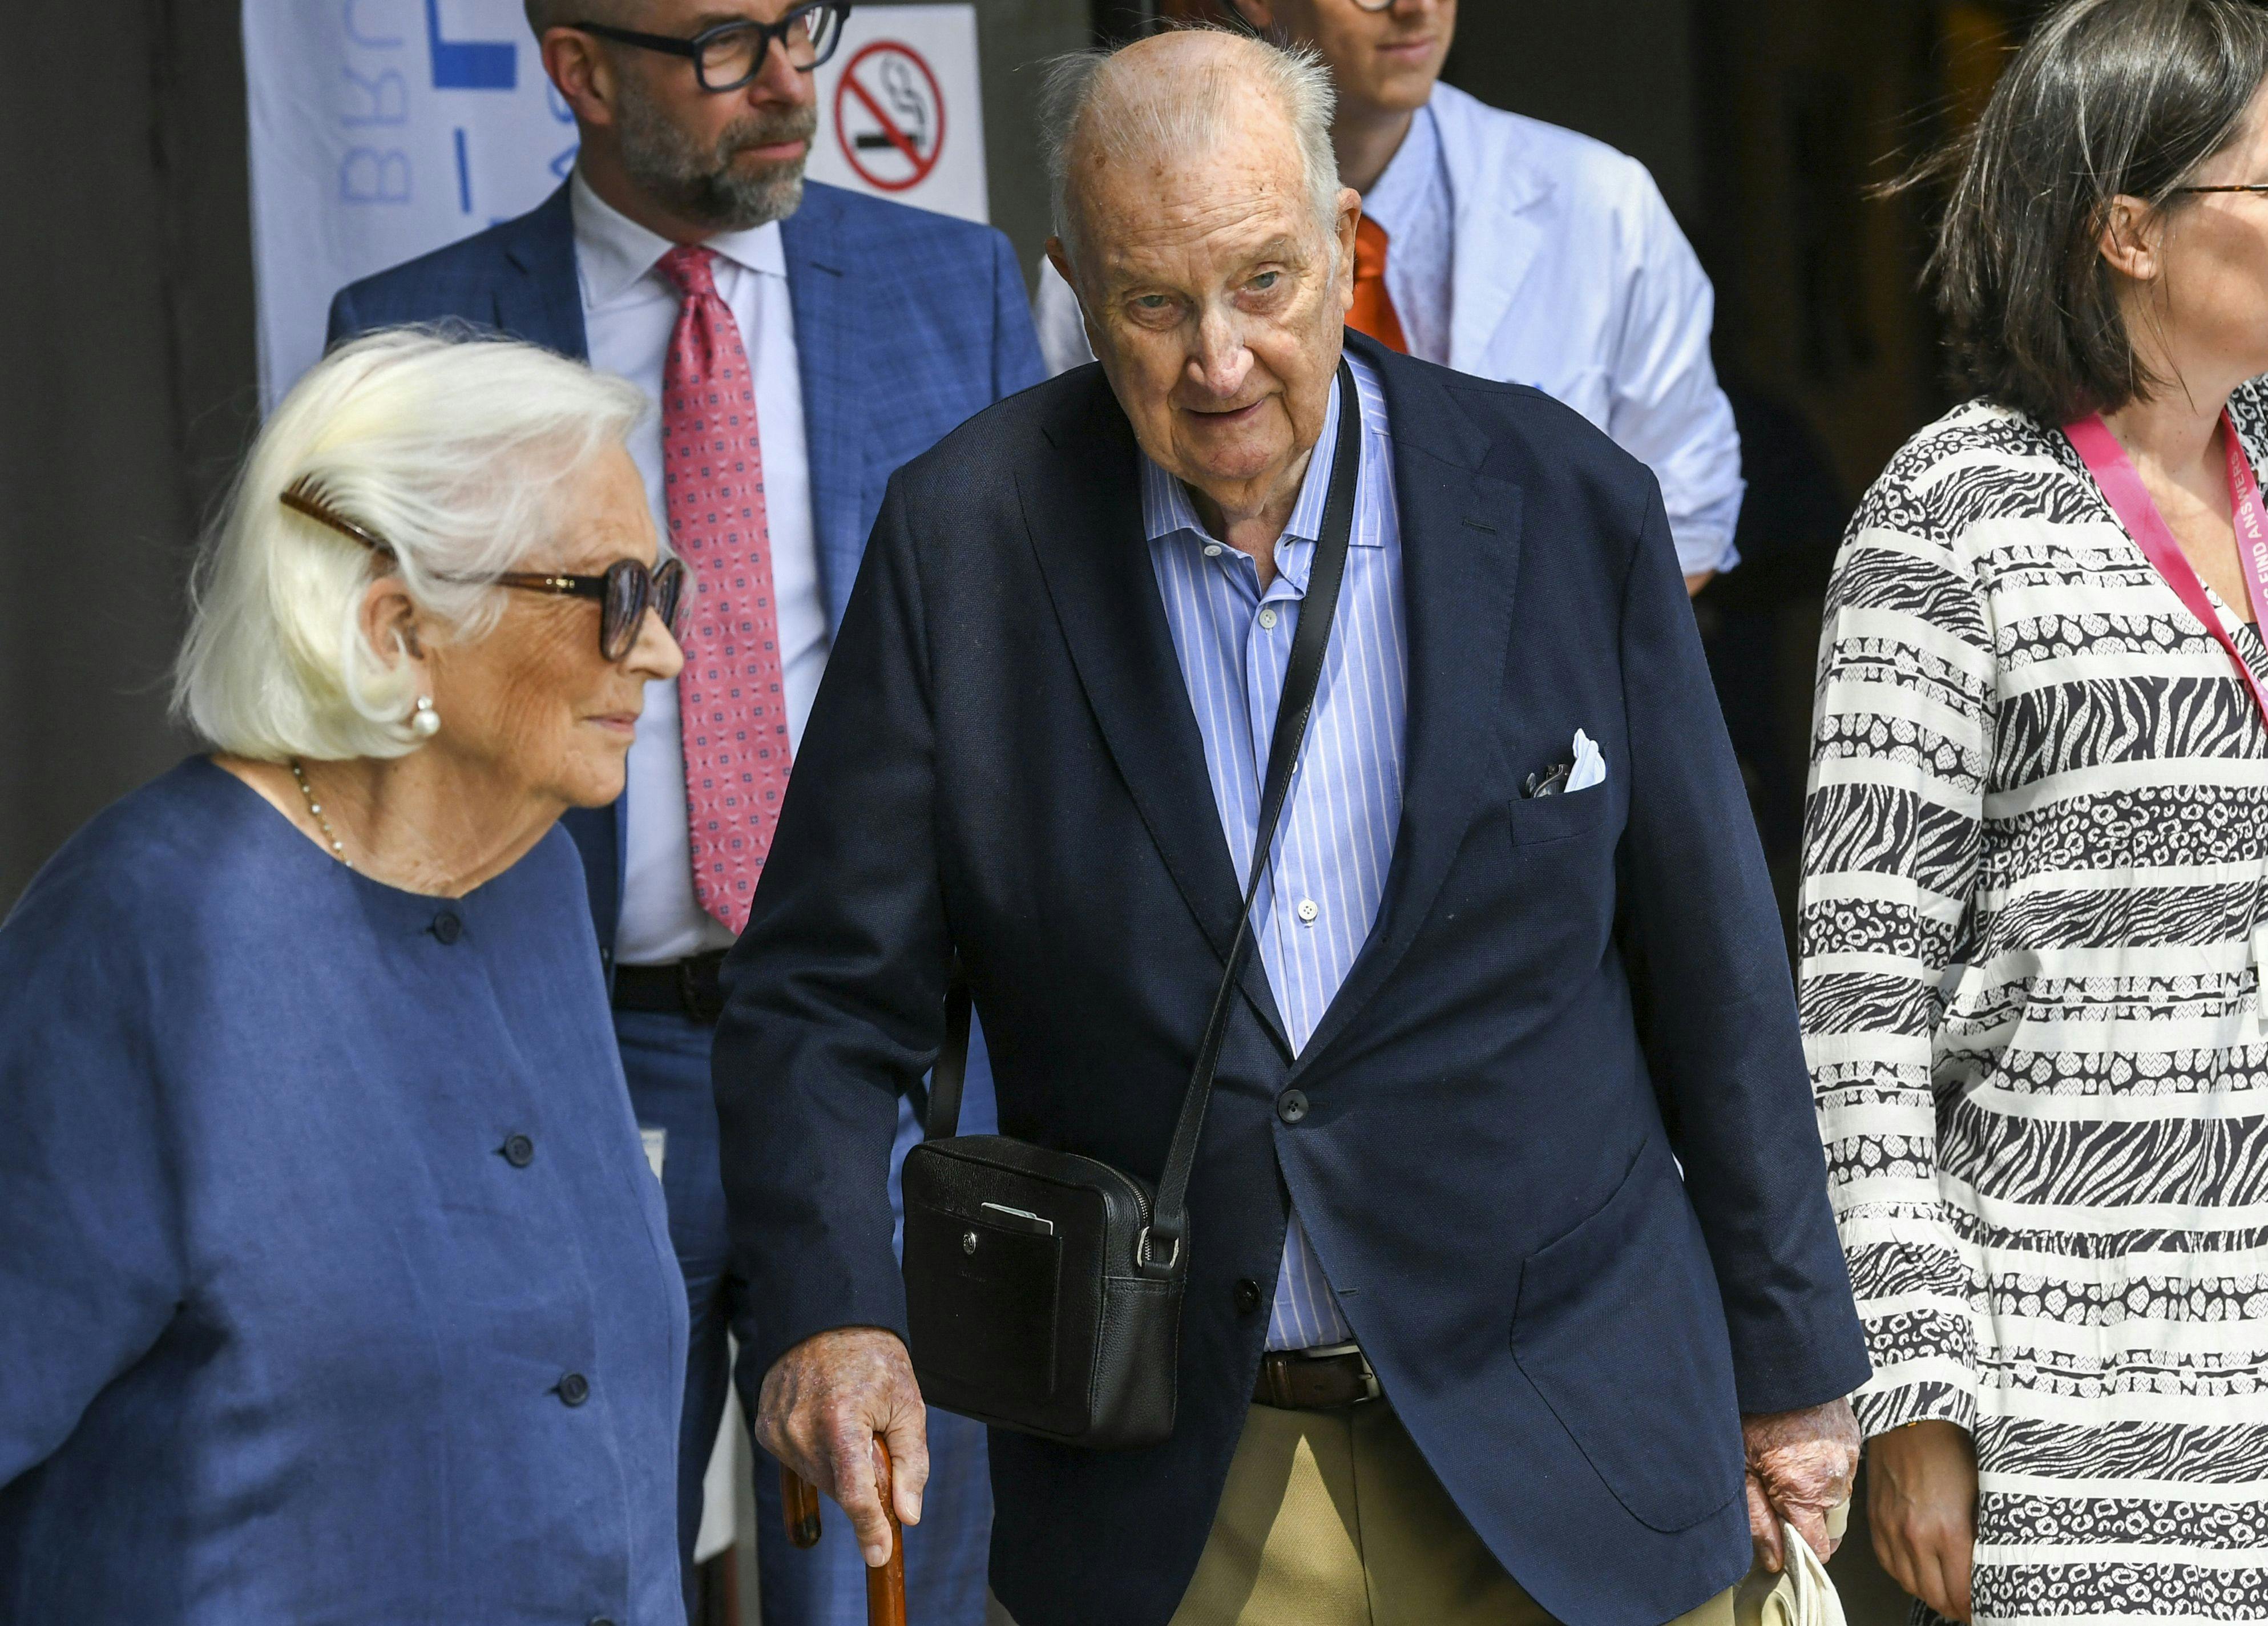 King Albert II of Belgium (C) and Queen Paola of Belgium (L) leave the Saint-Luc hospital in Brussels, on July 5, 2023. Eighty-nine year-old King Albert II left hospital, a week after he was admitted to the hospital with dehydration symptoms. (Photo by FREDERIC SIERAKOWSKI / Belga / AFP) / Belgium OUT